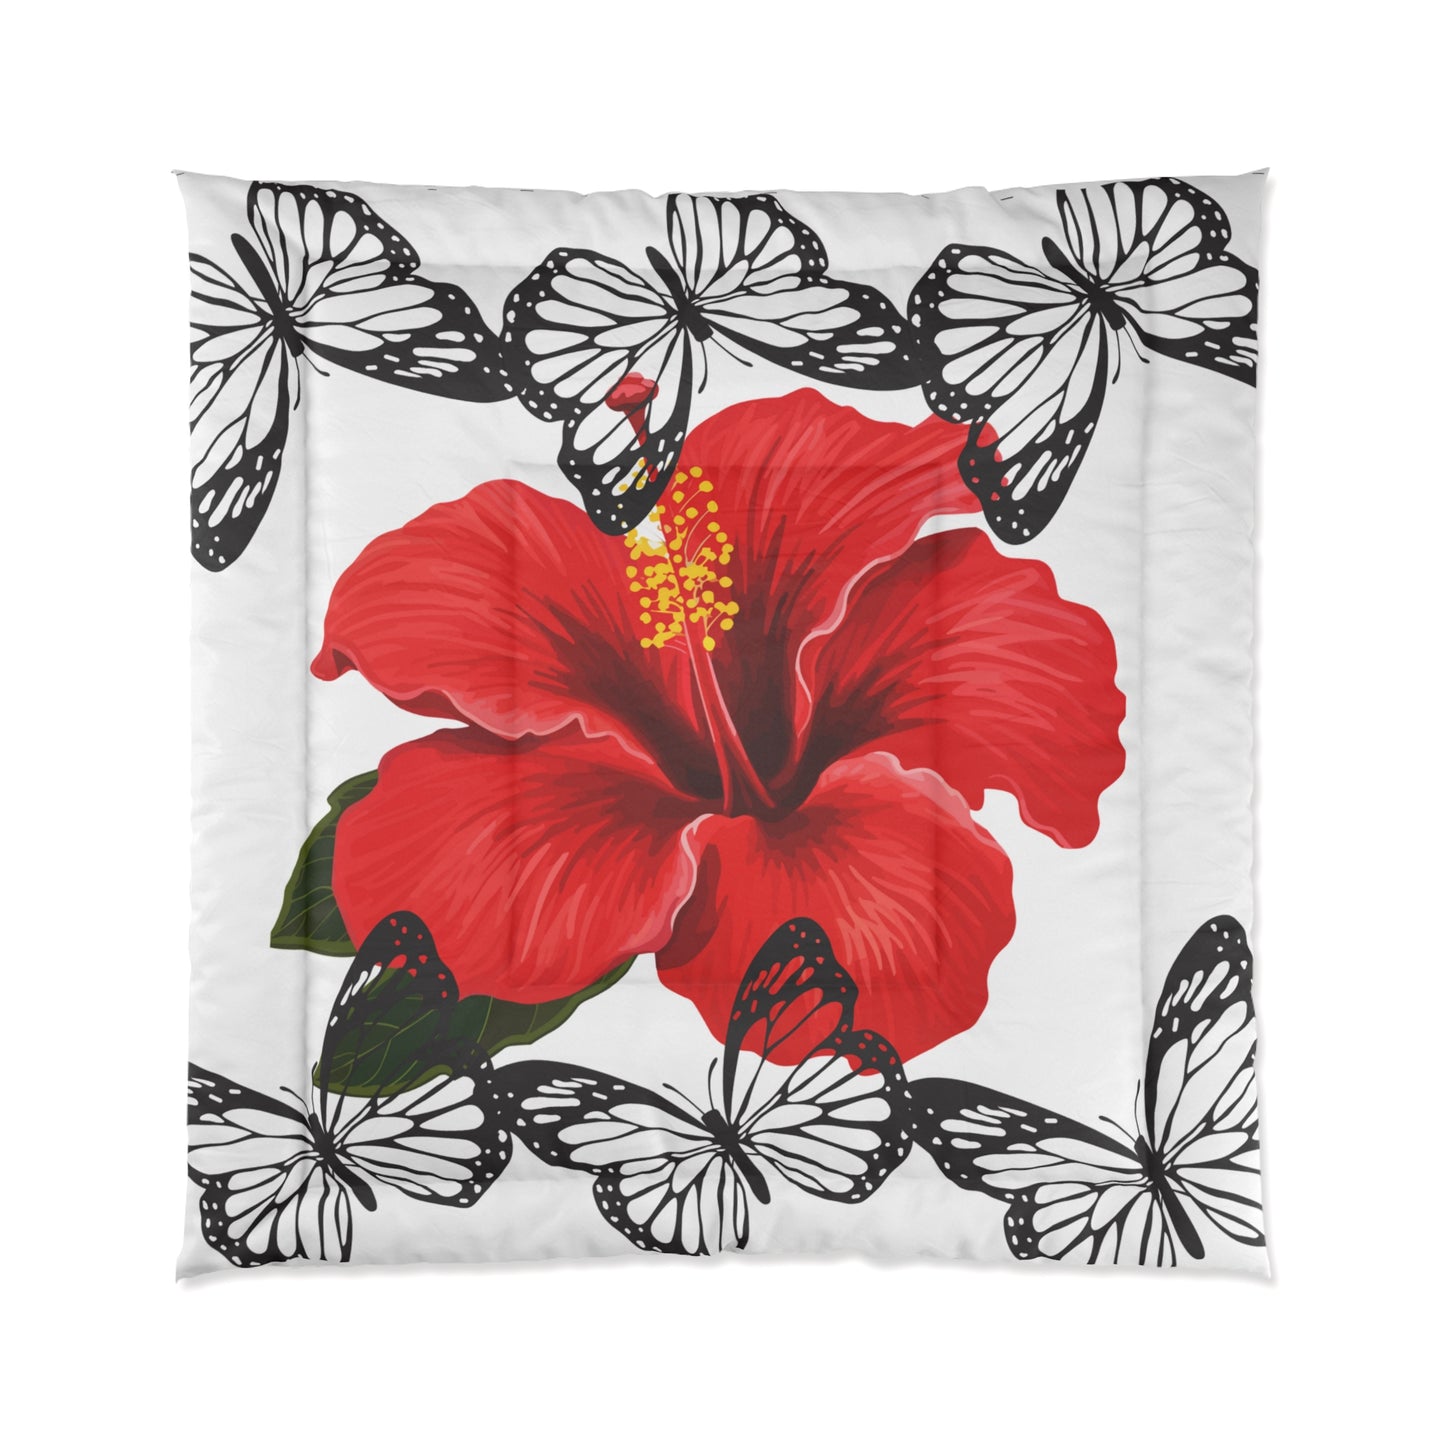 Ultimate comfort doona blanket with Kaute flowers and with butterfly edges